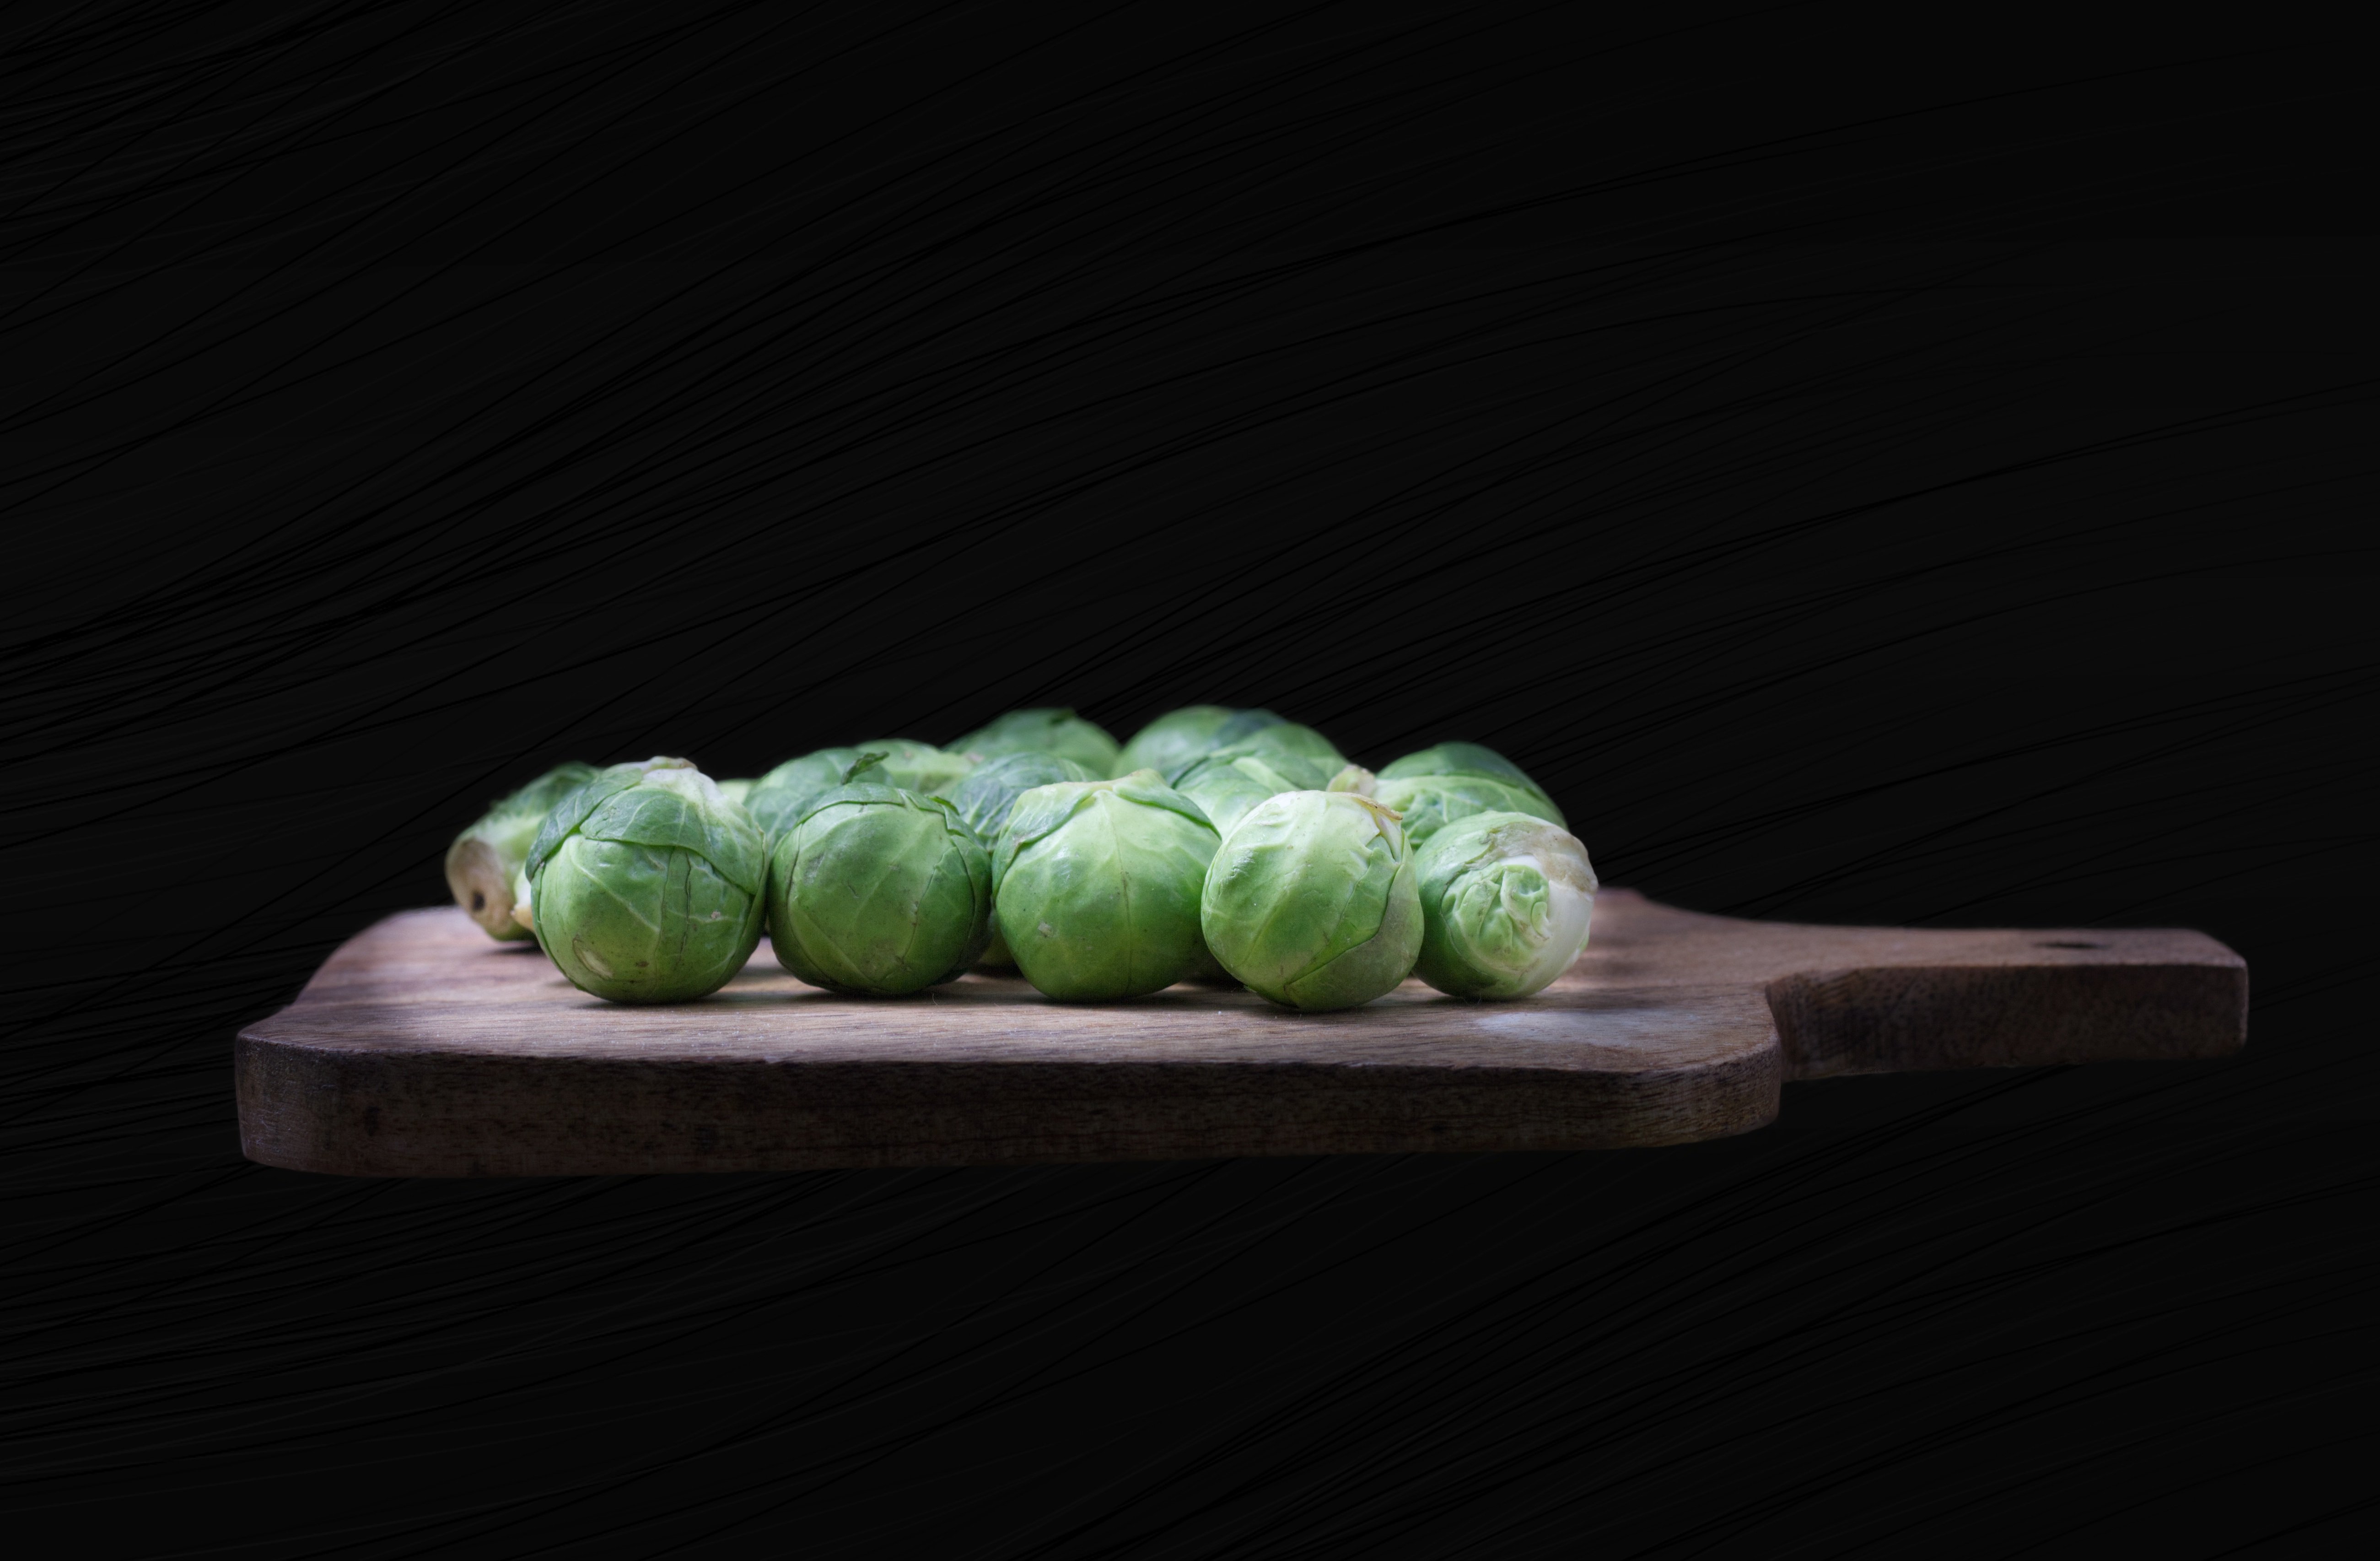 Brussels Sprouts on a Chopping Board by ktryna